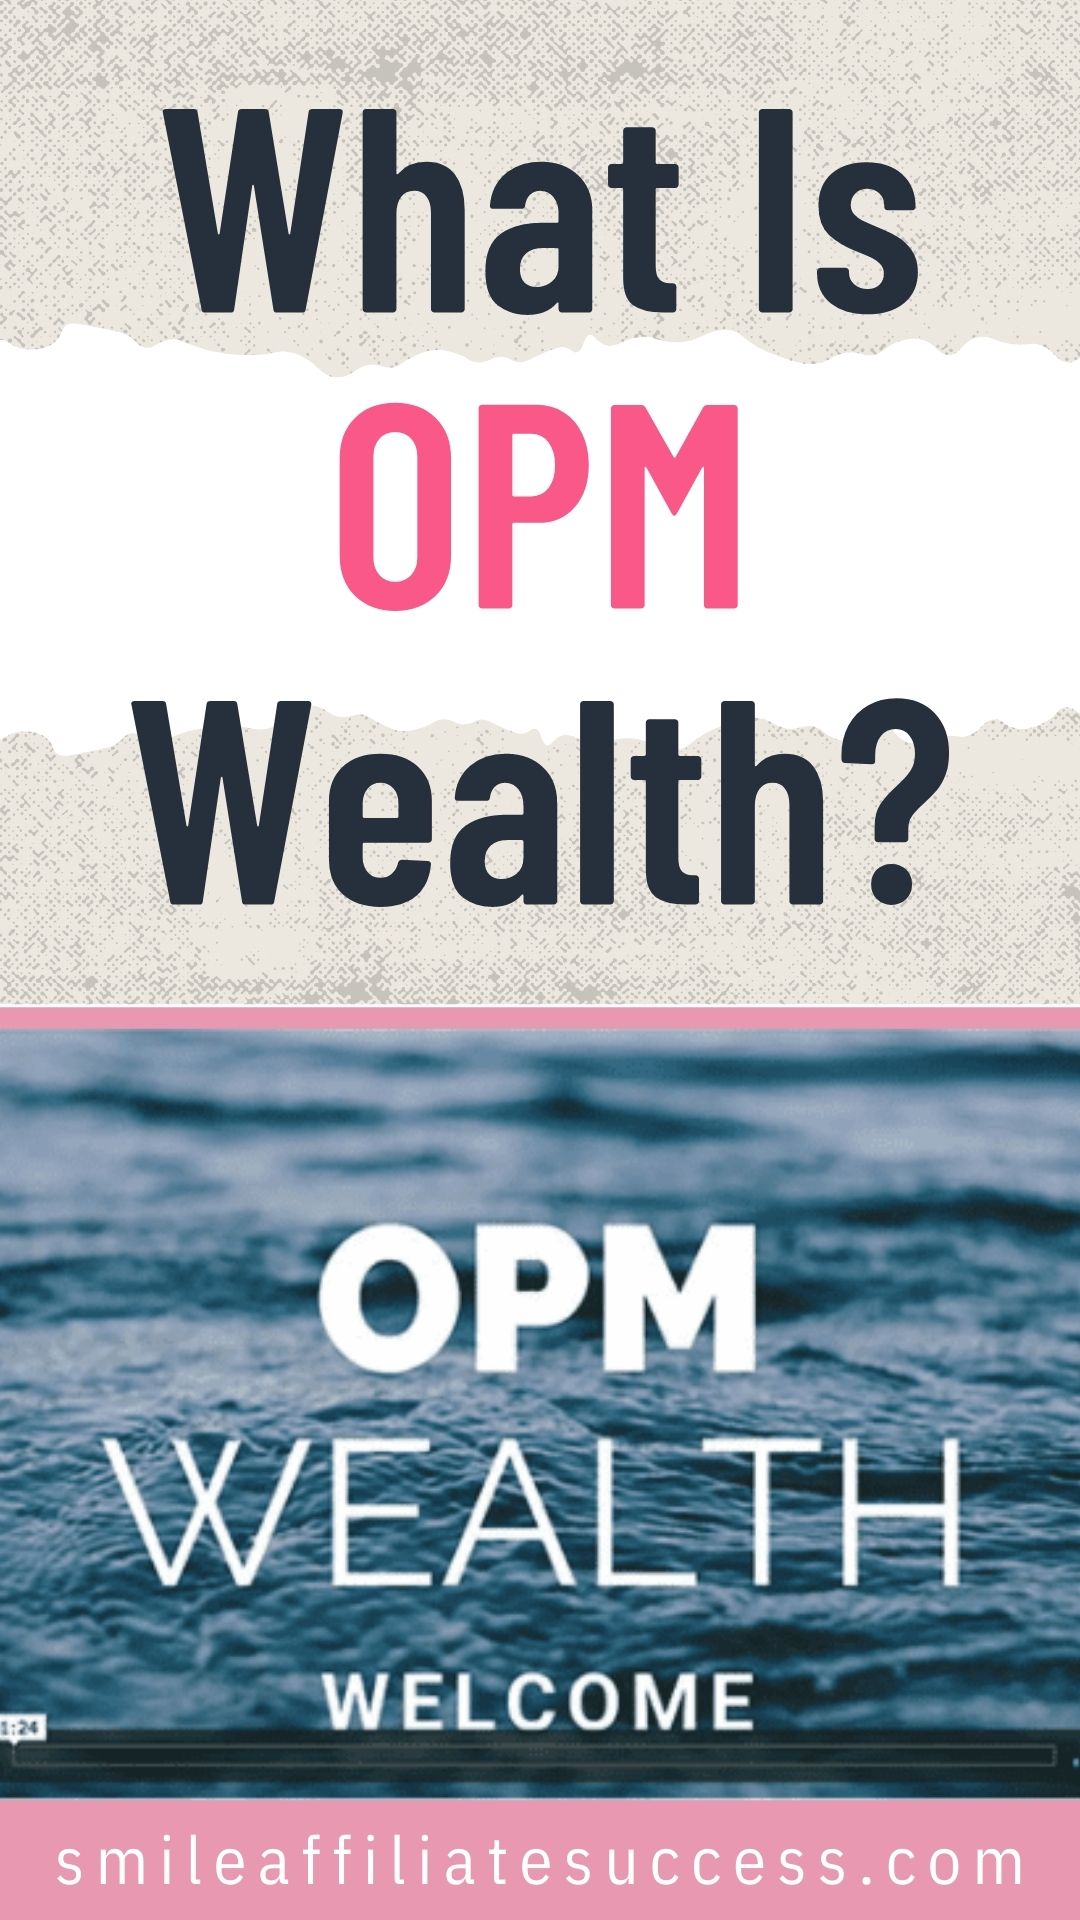 What Is OPM Wealth?